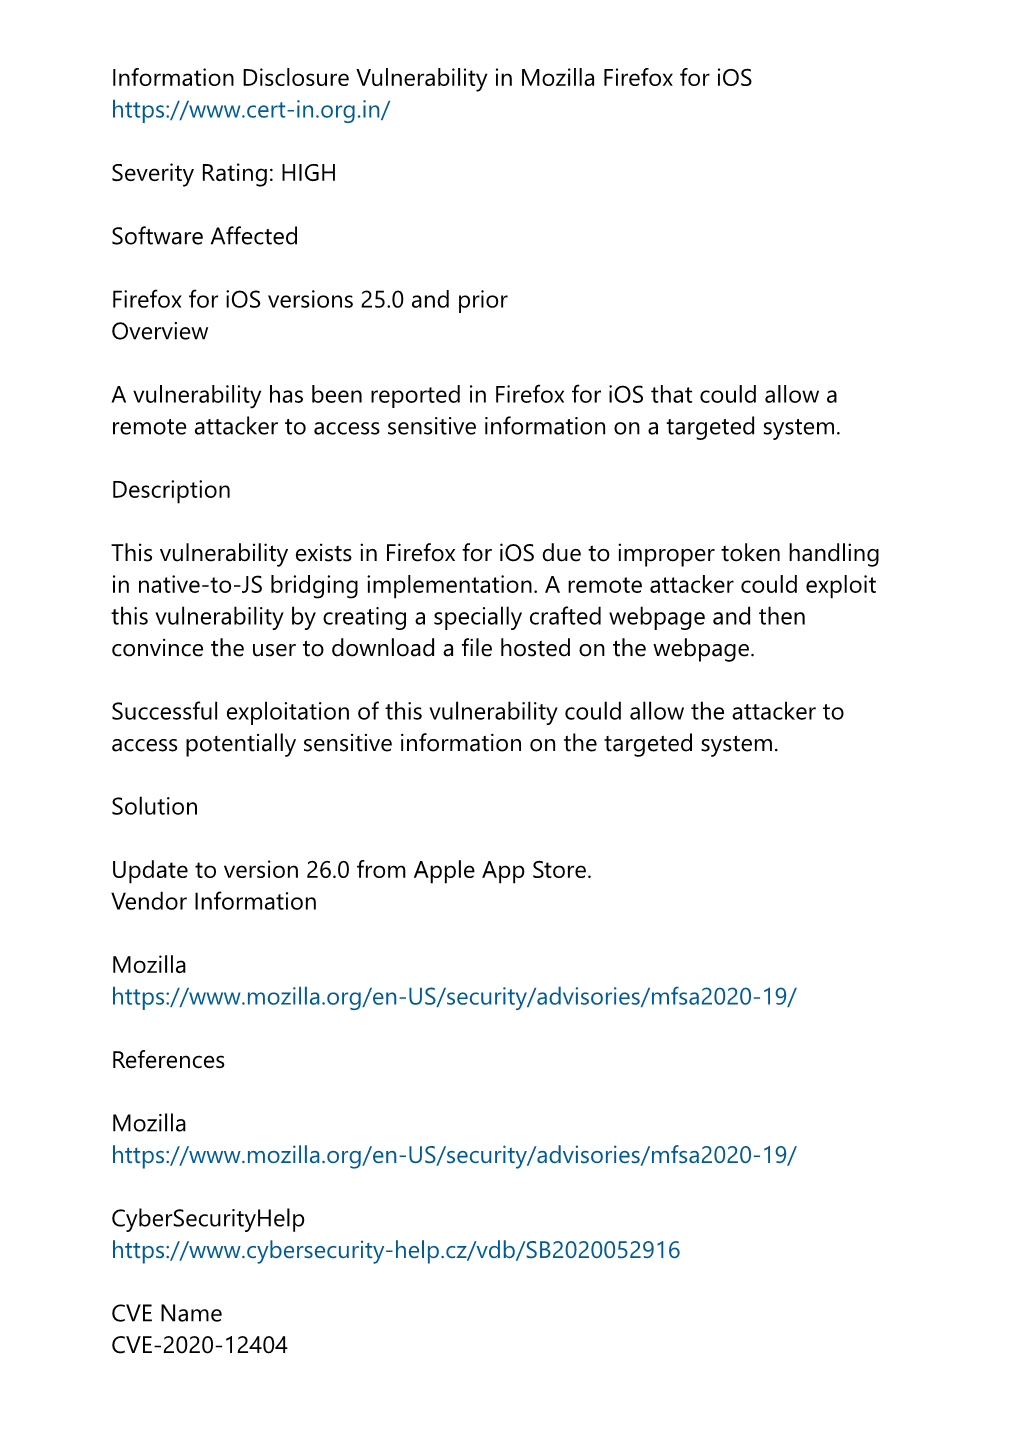 Information Disclosure Vulnerability in Mozilla Firefox for Ios